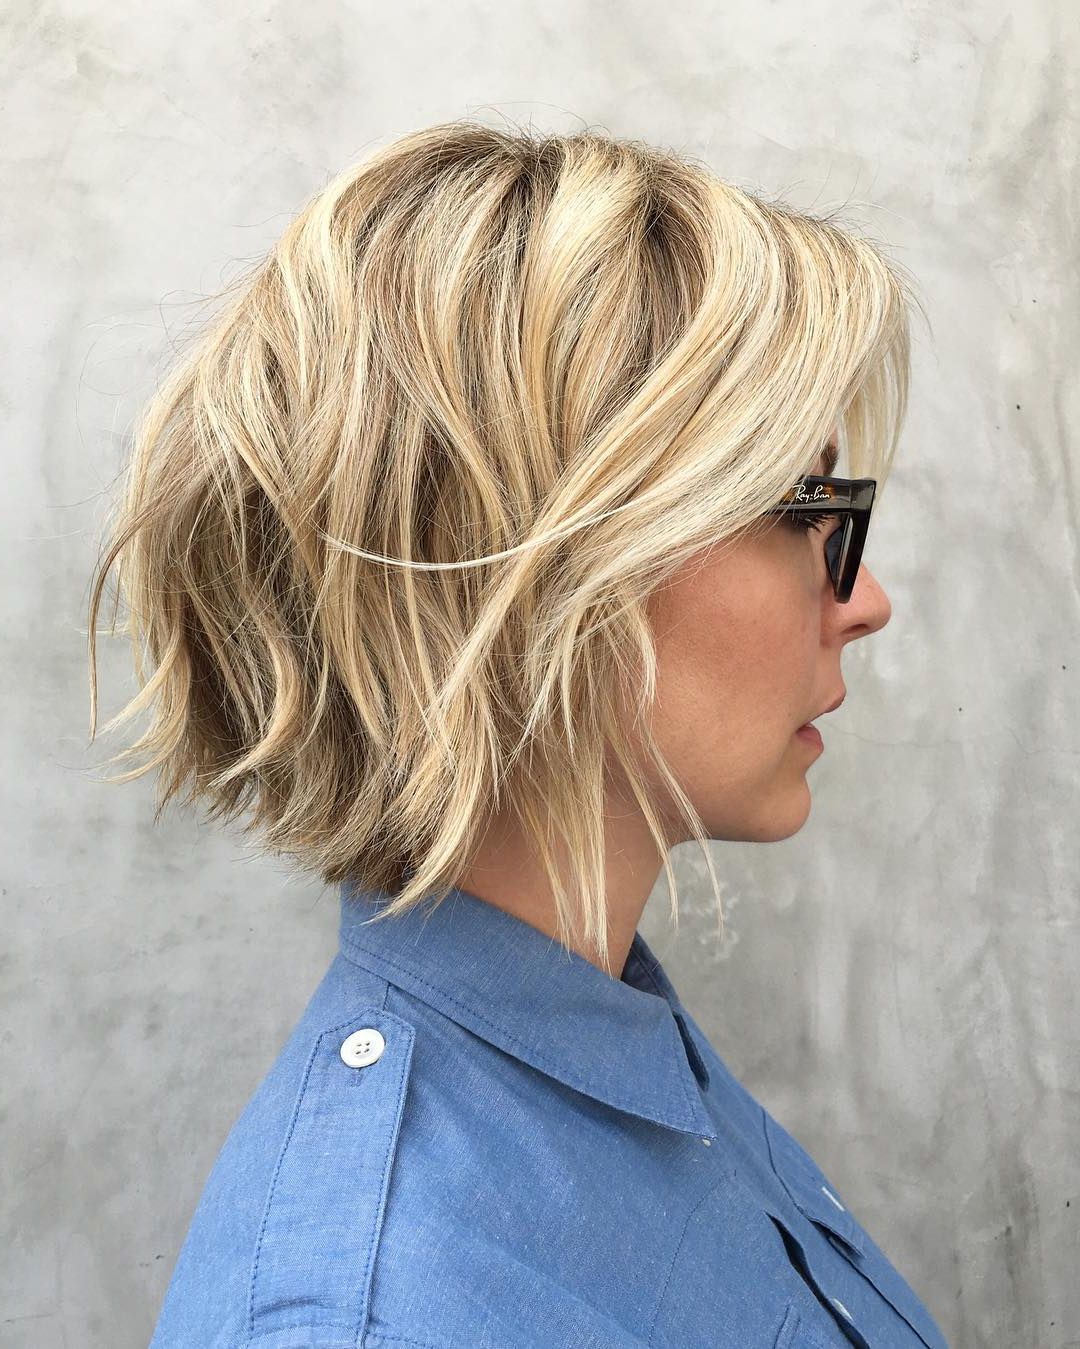 Shag Haircuts And Hairstyles In 2019 — Therighthairstyles Throughout Recent Layered Bob Shag Haircuts With Balayage (View 20 of 20)